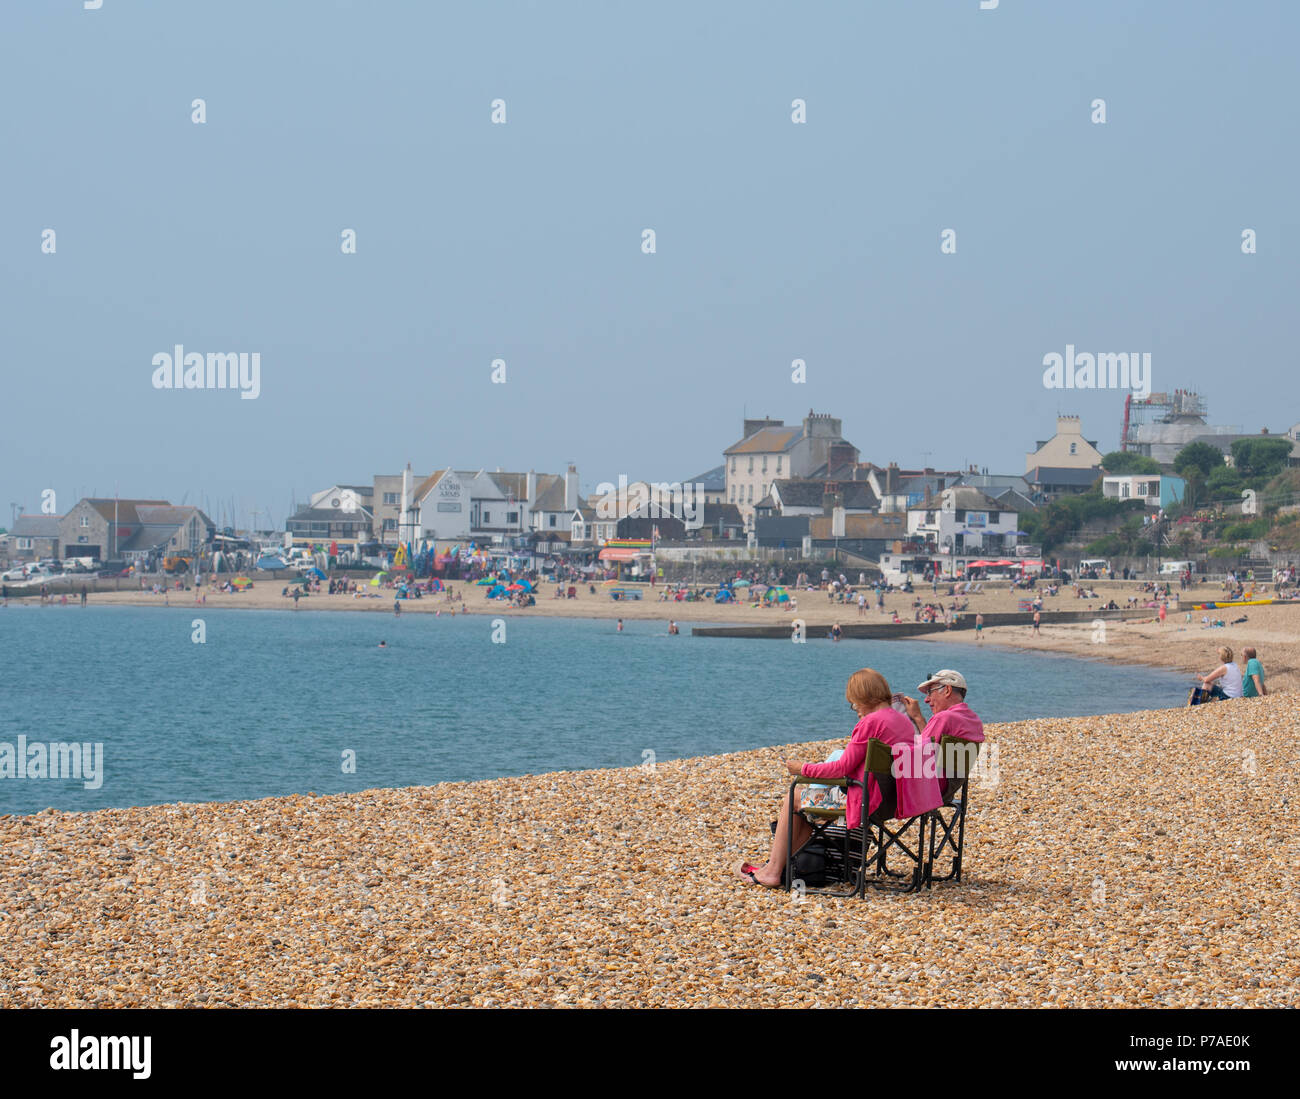 Lyme Regis, Dorset, UK. 5th July 2018. UK Weather: Hot with hazy sunshine in Lyme Regis. Visitors and locals head to the beach at the coastal resort of Lyme Regis. The outlook is good with high pressure dominant brigning hot conditions and humidity over the weekend. Credit: Celia McMahon/Alamy Live News Stock Photo